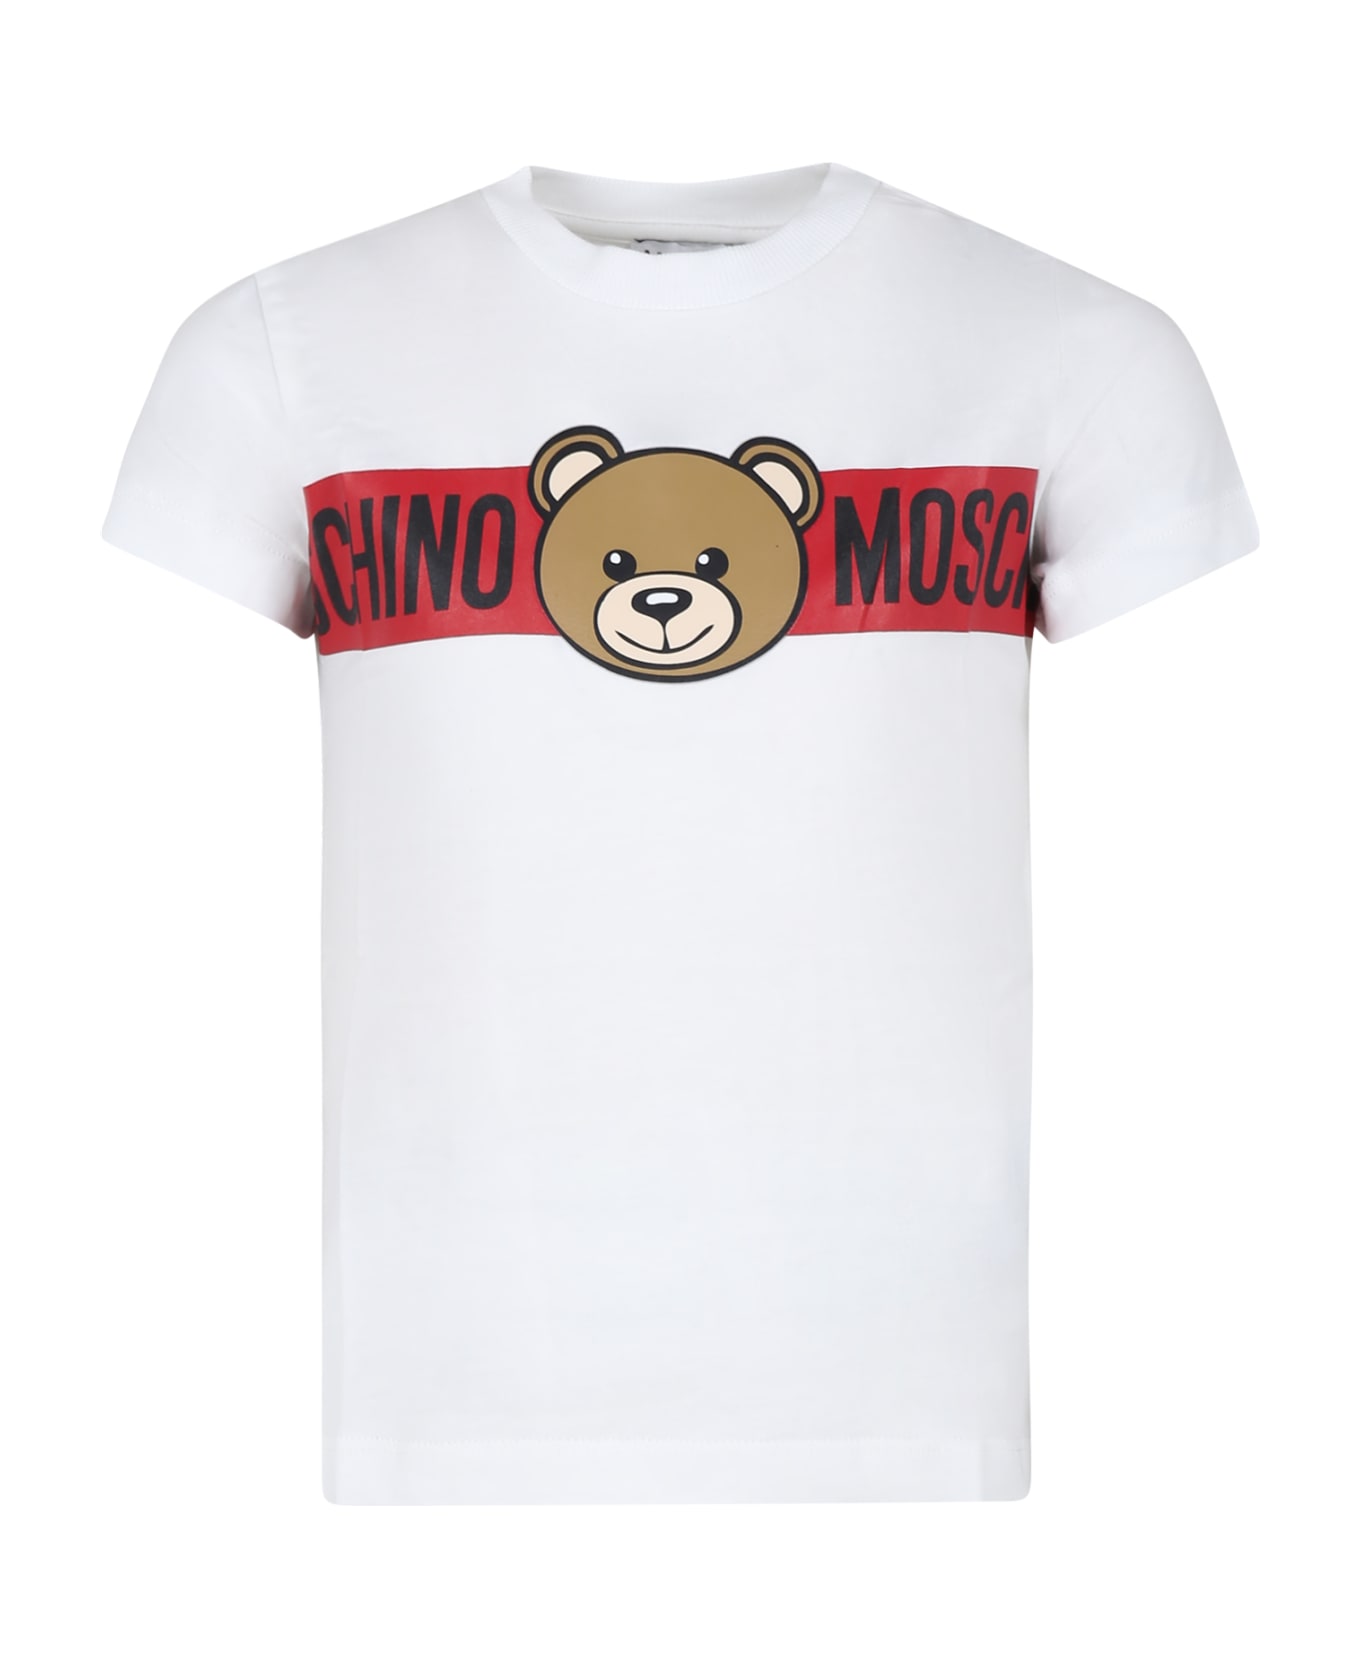 Moschino White T-shirt For Kids With Teddy Bear And Logo - White